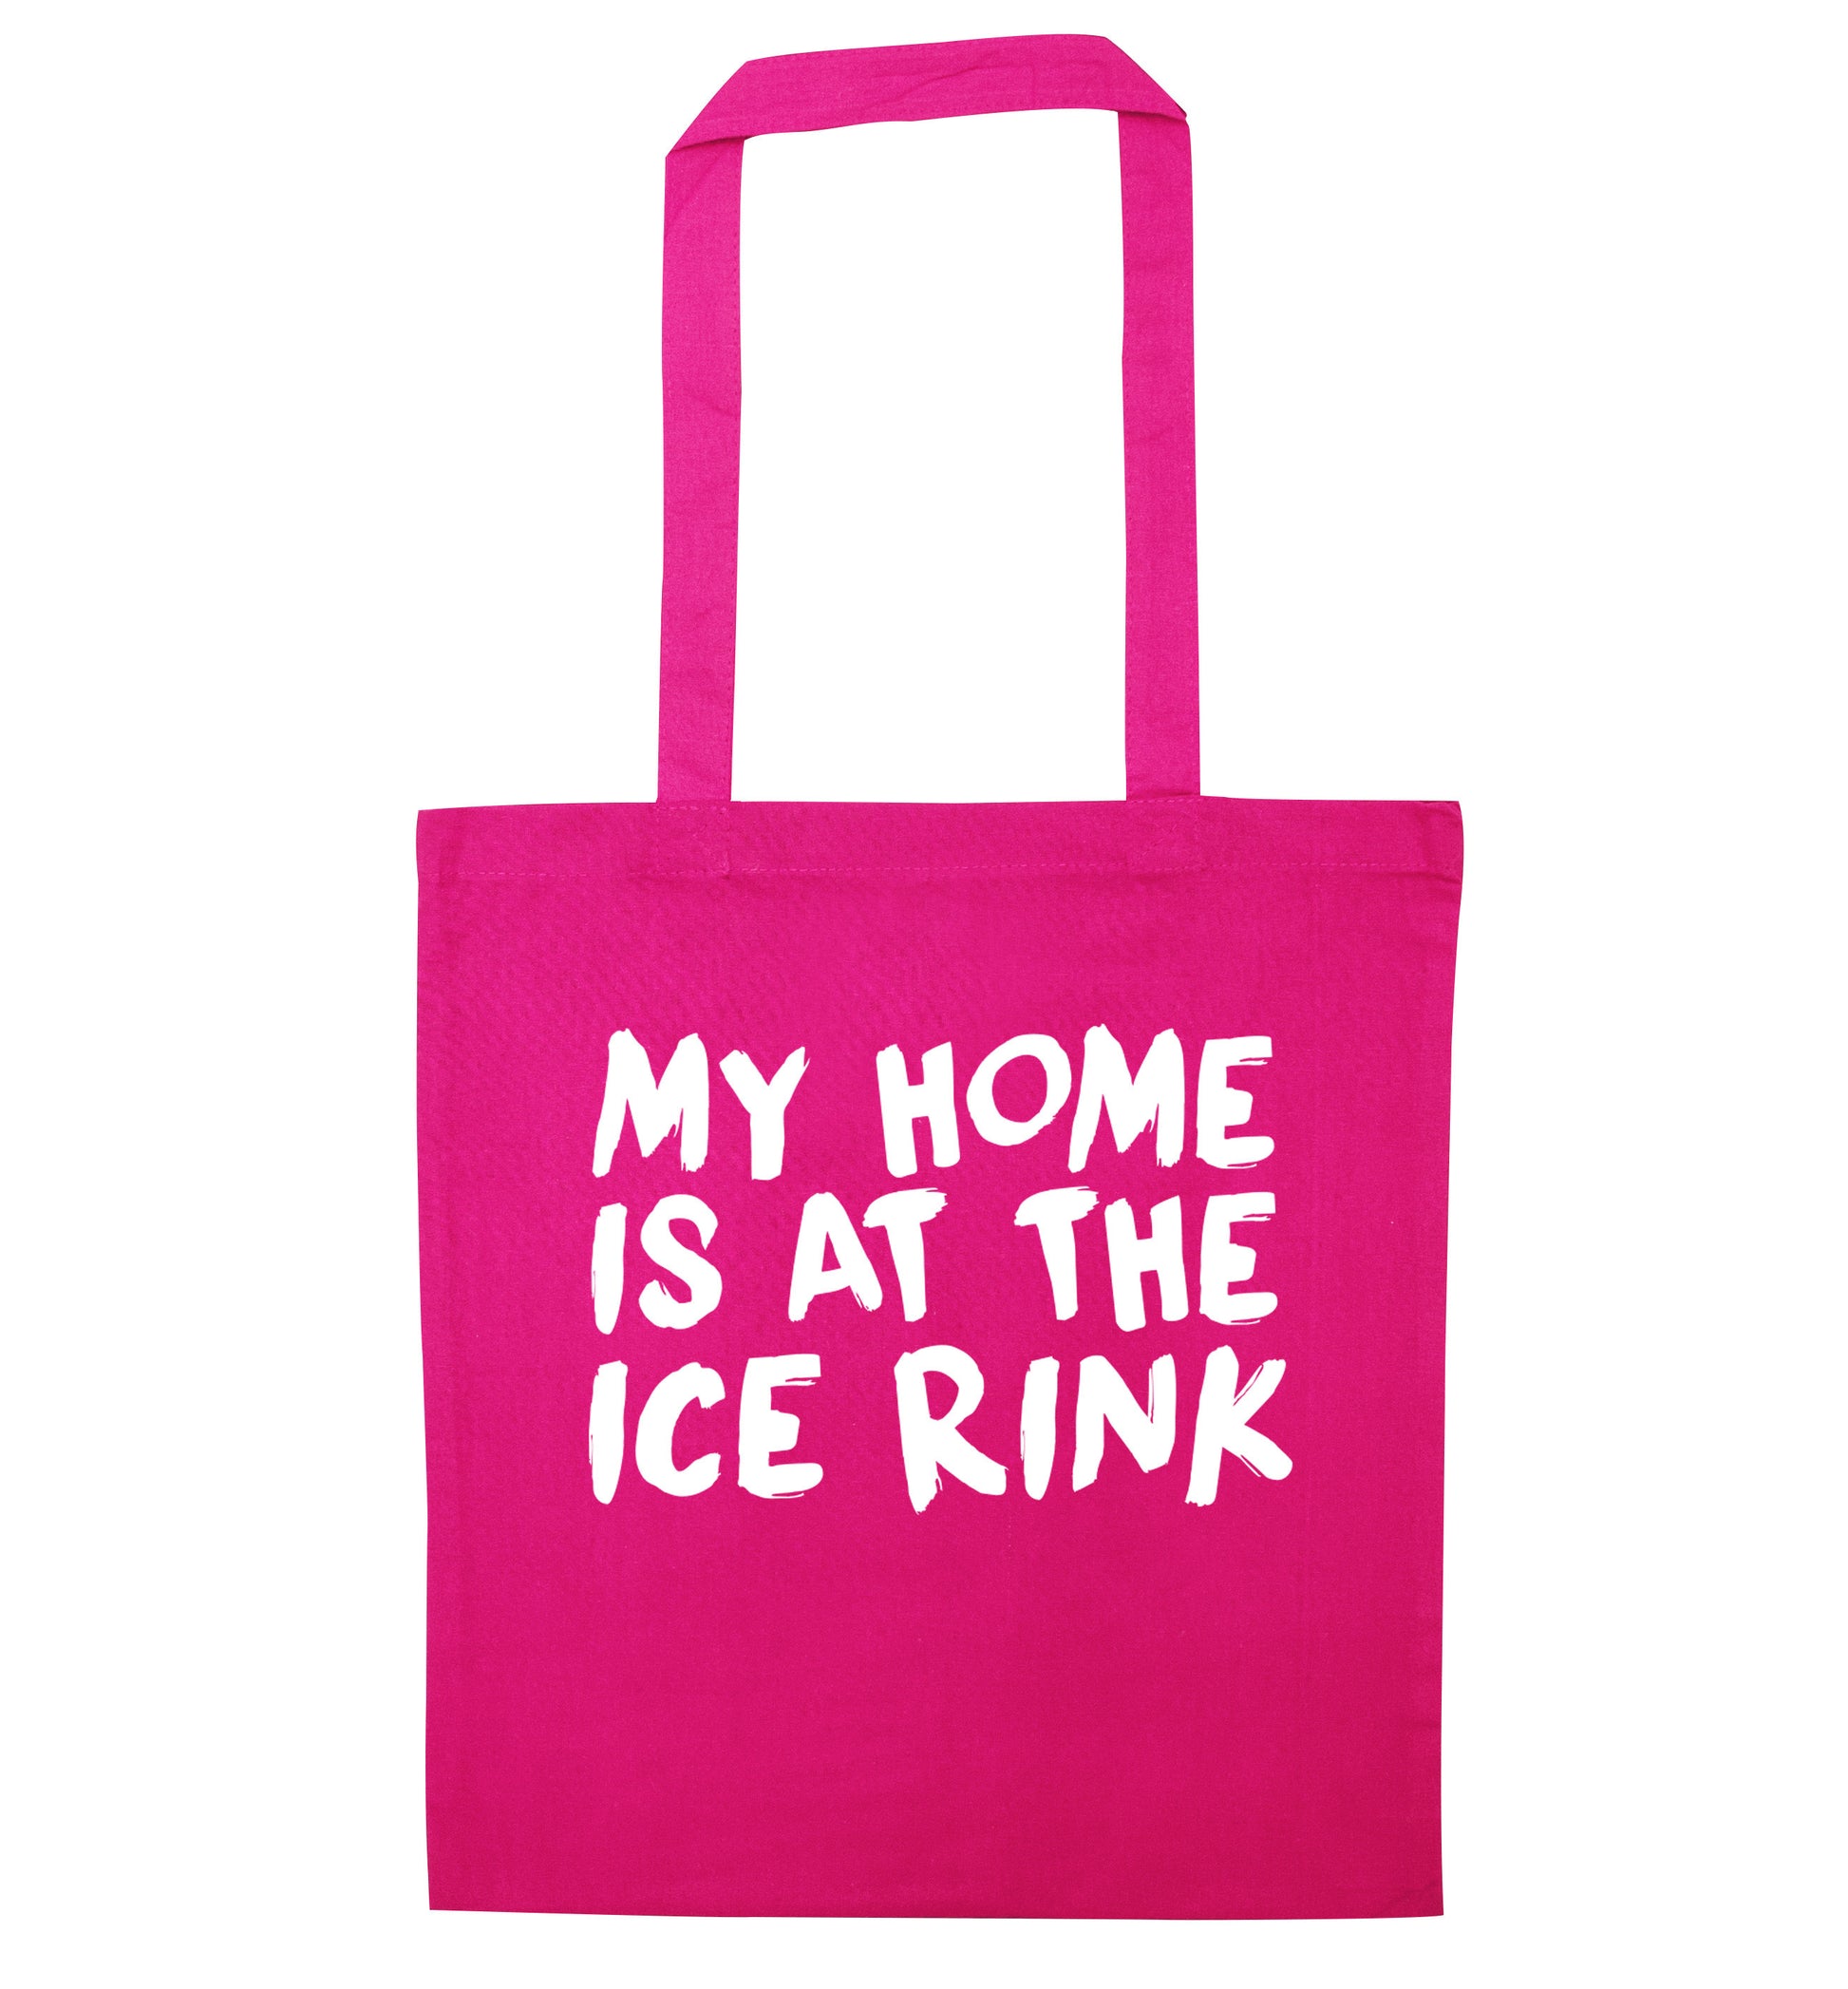 My home is at the ice rink pink tote bag